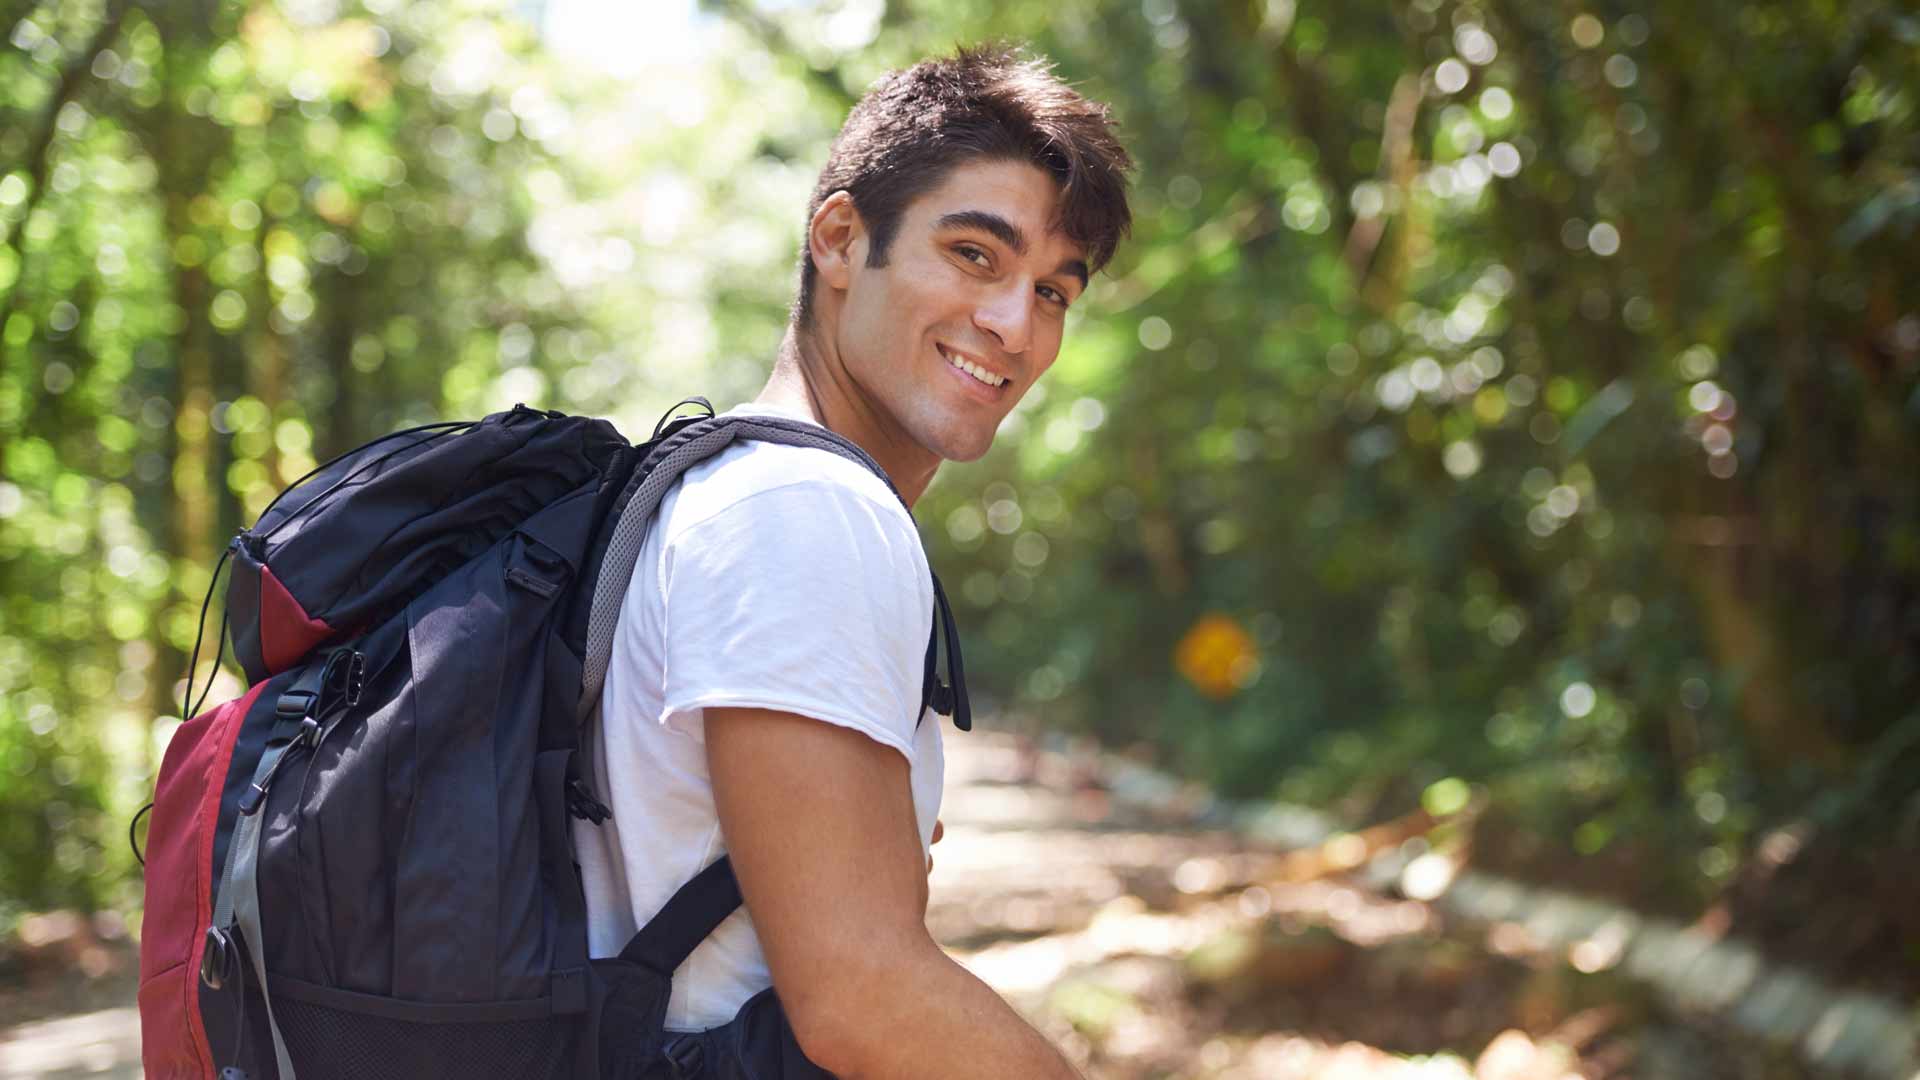 Smiling young man with a black backpack on his back.